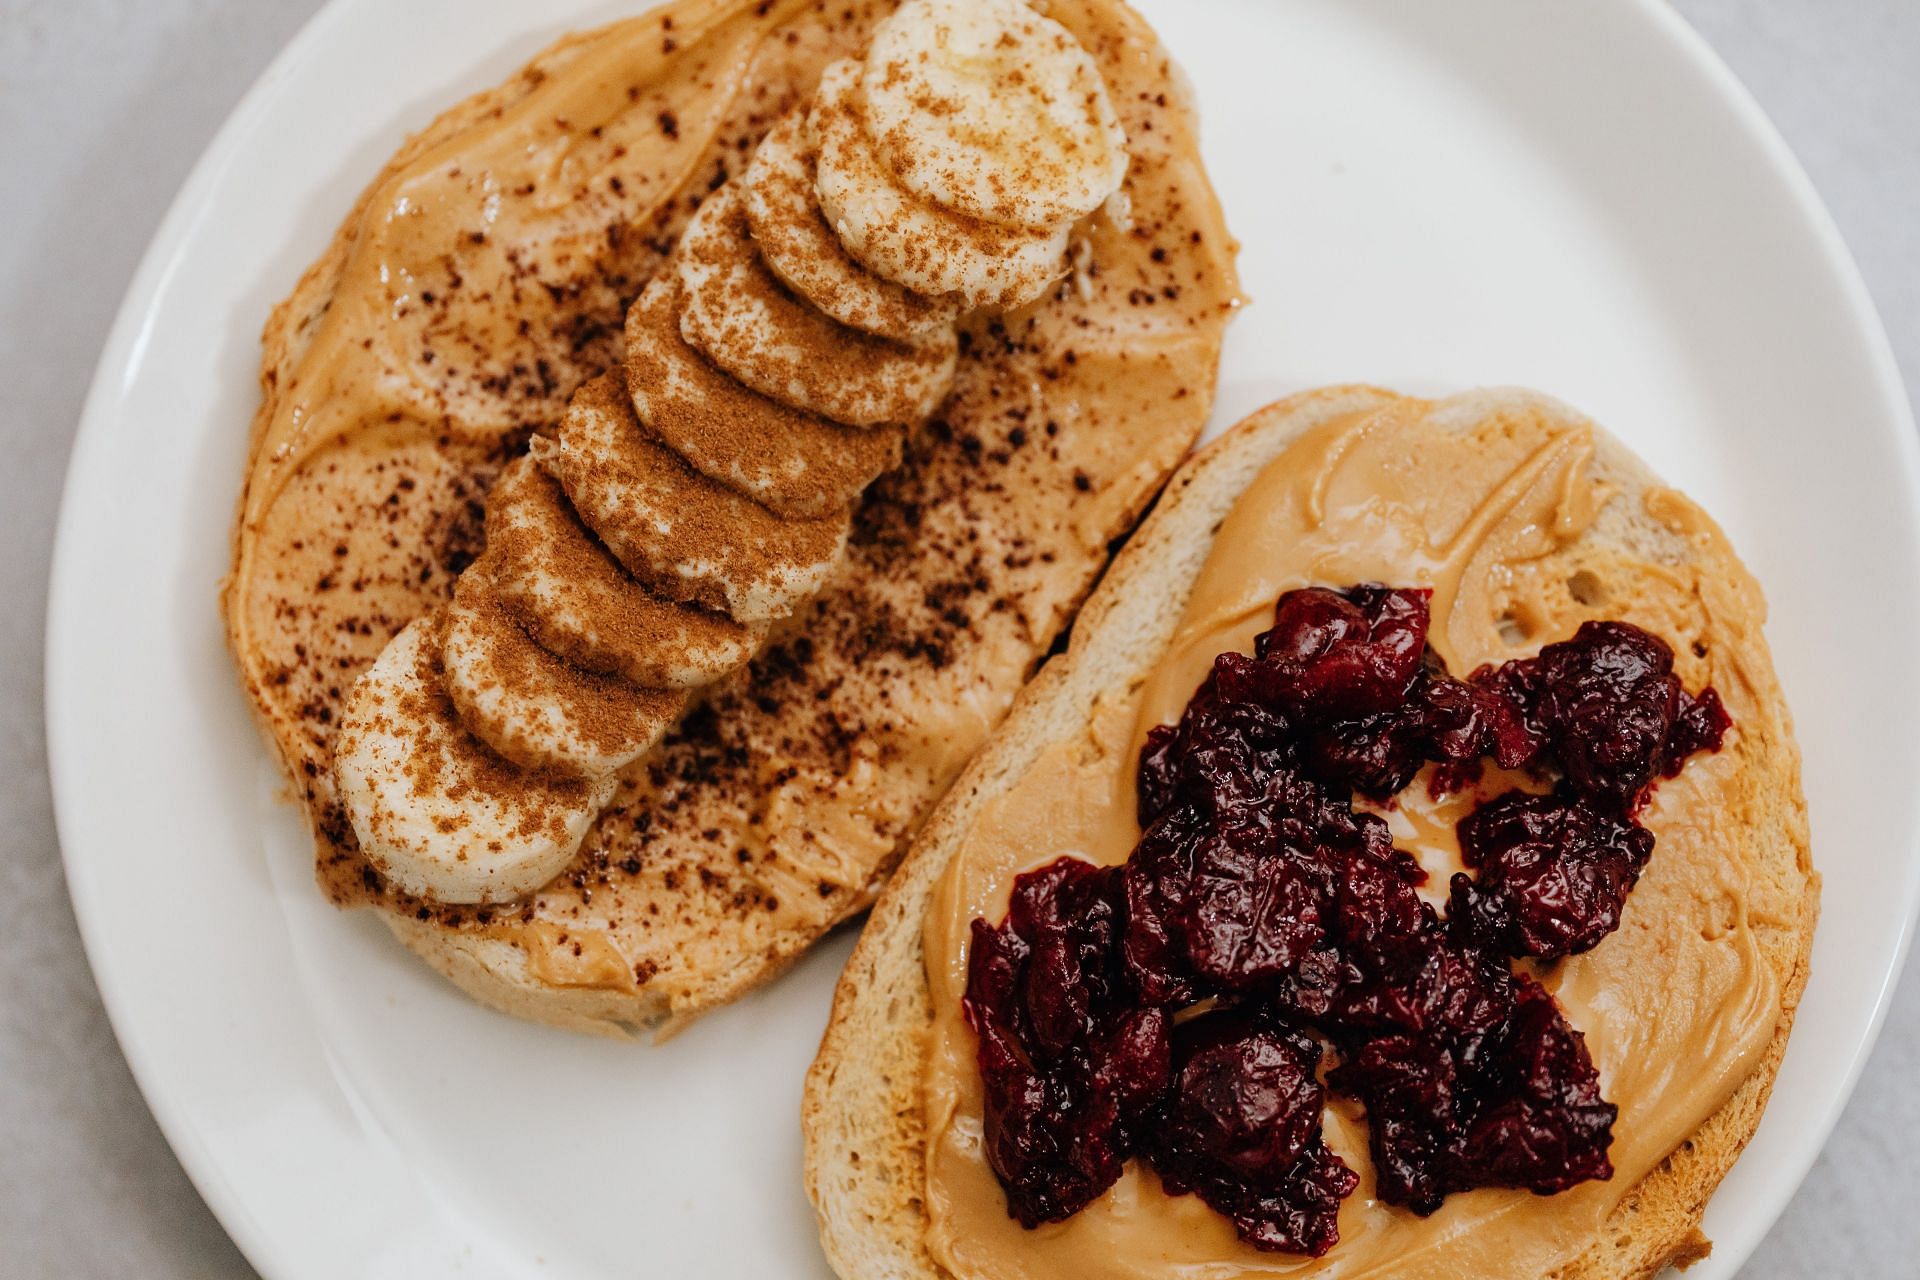 8 warming foods to beat the cold weather (image sourced via Pexels / Photo by Karolina)